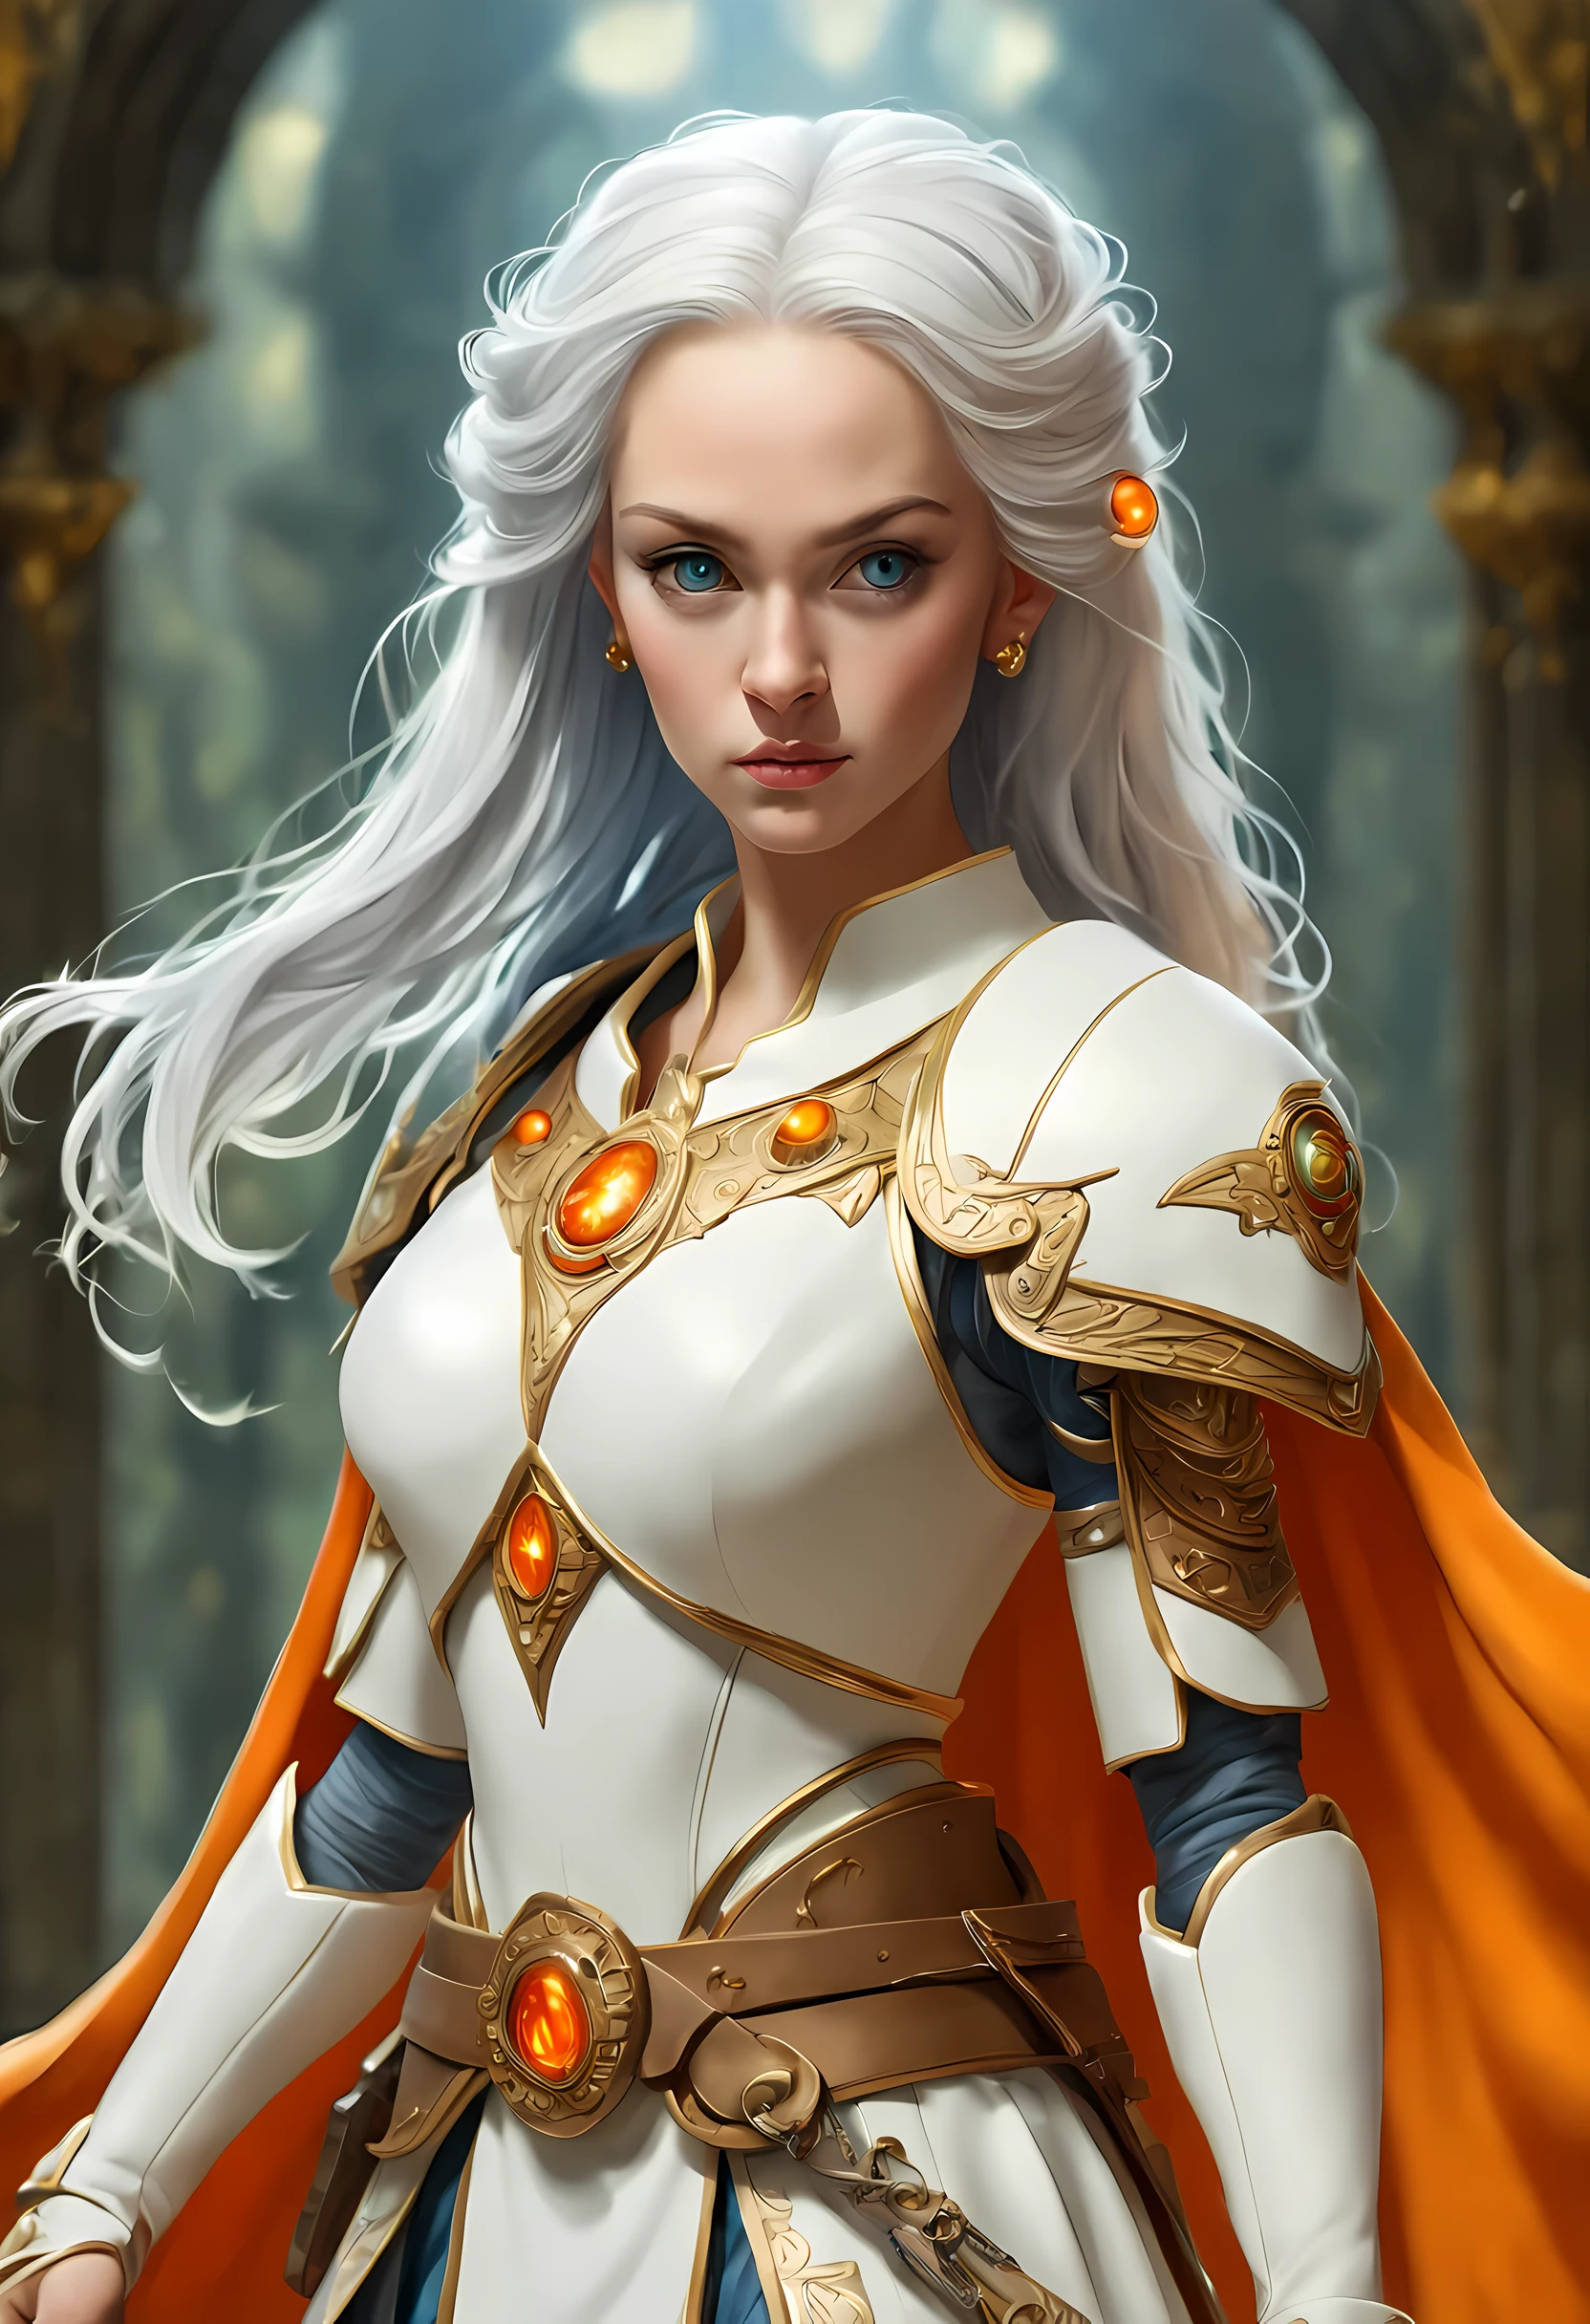 fantasy art, dnd art, RPG art, wide shot, (masterpiece: 1.4) a (portrait: 1.3) intense details, highly detailed, photorealistic, best quality, highres, portrait a female (fantasy art, Masterpiece, best quality: 1.3) bl3uprint (blue skin: 1.5, intense details facial details, exquisite beauty, (fantasy art, Masterpiece, best quality) cleric, (blue: 1.3) skinned female, (white hair: 1.3), long hair, intense (green: 1.3) eye, fantasy art, Masterpiece, best quality) armed a fiery sword red fire, wearing heavy (white: 1.3) half plate mail armor, wearing high heeled laced boots, wearing an(orange :1.3) cloak, wearing glowing holy symbol GlowingRunes_yellow, within fantasy temple background, reflection light, high details, best quality, 16k, [ultra detailed], masterpiece, best quality, (extremely detailed), close up, ultra wide shot, photorealistic, RAW, fantasy art, dnd art, fantasy art, realistic art,((best quality)), ((masterpiece)), (detailed), perfect face, ((no ears: 1.6))